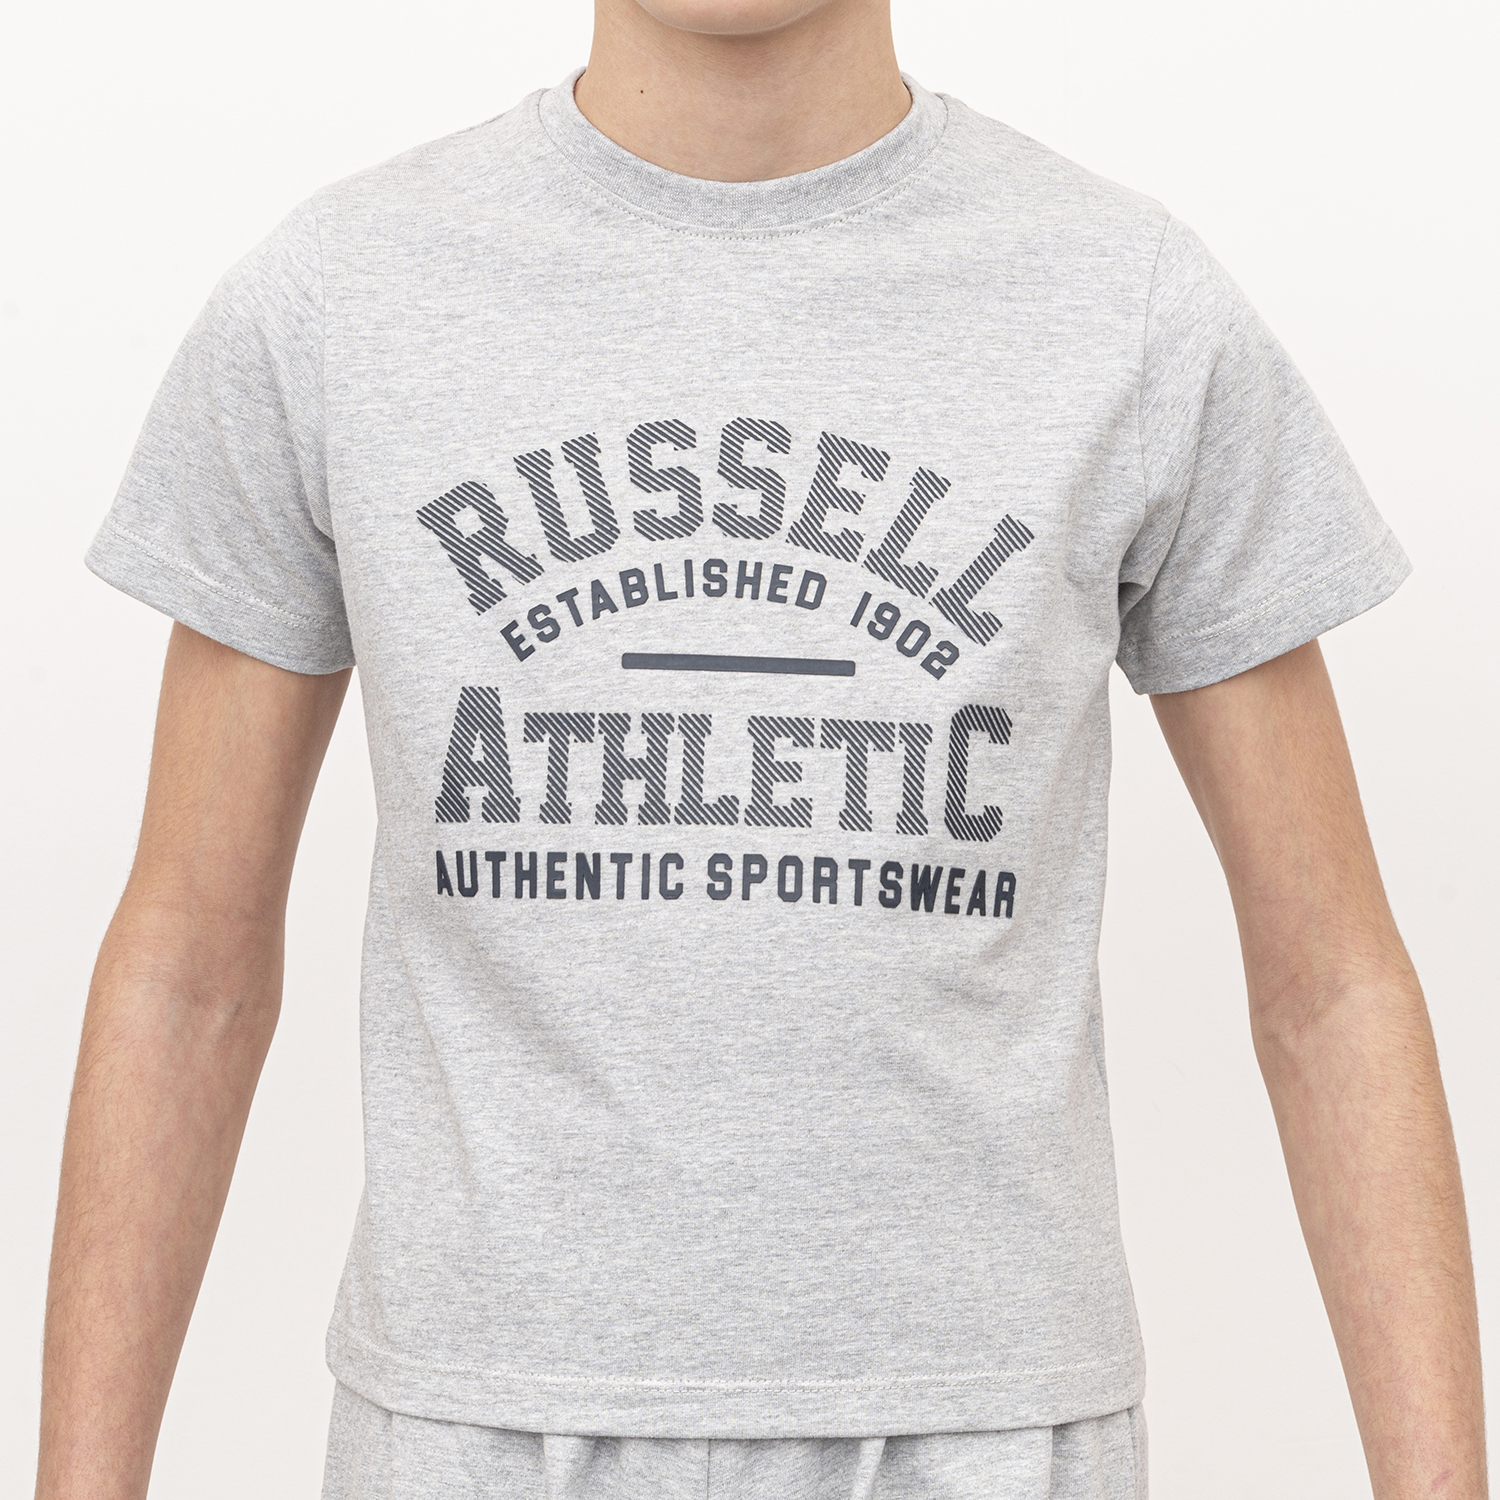 Russell Athletic - S/S CREWNECK TEE SHIRT - NEW GREY MARL